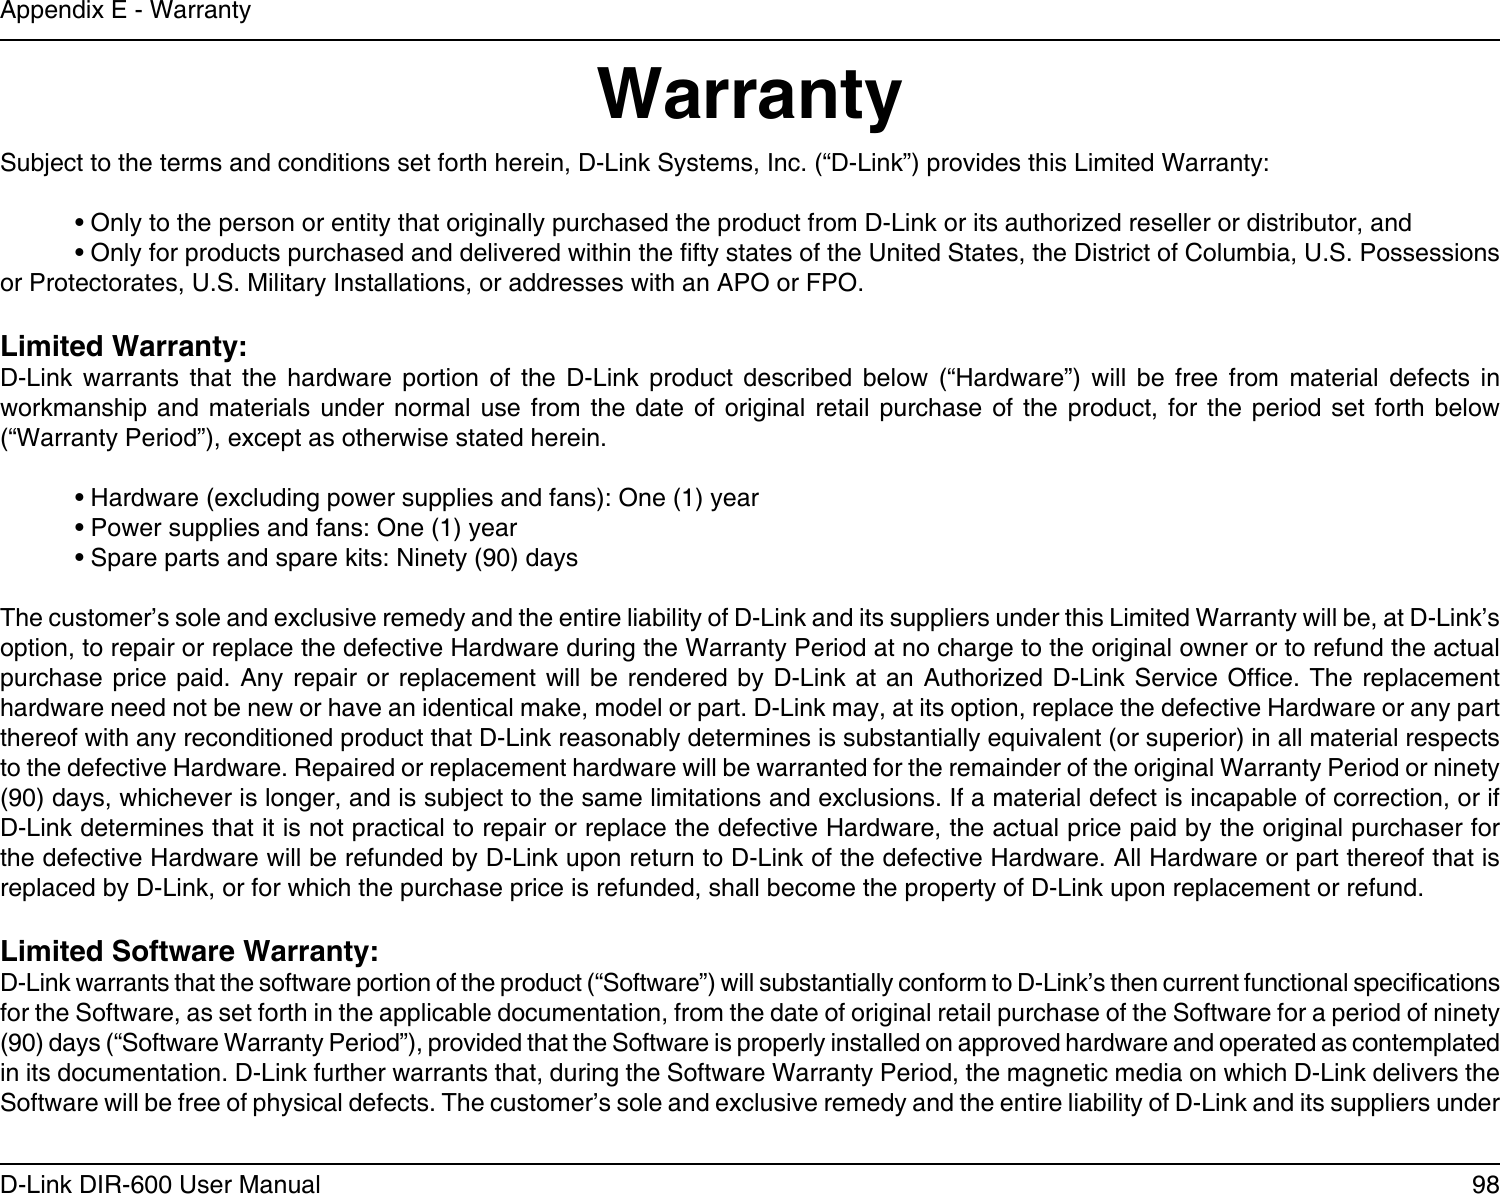 98D-Link DIR-600 User ManualAppendix E - WarrantyWarrantySubject to the terms and conditions set forth herein, D-Link Systems, Inc. (“D-Link”) provides this Limited Warranty:  • Only to the person or entity that originally purchased the product from D-Link or its authorized reseller or distributor, and  • Only for products purchased and delivered within the fty states of the United States, the District of Columbia, U.S. Possessions   or Protectorates, U.S. Military Installations, or addresses with an APO or FPO.Limited Warranty:D-Link  warrants  that  the  hardware  portion  of  the  D-Link  product  described  below  (“Hardware”)  will  be  free  from  material  defects  in workmanship  and  materials under  normal  use from  the  date of  original retail  purchase  of the  product,  for the  period  set forth  below (“Warranty Period”), except as otherwise stated herein.  • Hardware (excluding power supplies and fans): One (1) year  • Power supplies and fans: One (1) year  • Spare parts and spare kits: Ninety (90) daysThe customer’s sole and exclusive remedy and the entire liability of D-Link and its suppliers under this Limited Warranty will be, at D-Link’s option, to repair or replace the defective Hardware during the Warranty Period at no charge to the original owner or to refund the actual purchase price paid. Any repair or replacement will be  rendered  by  D-Link  at  an  Authorized  D-Link  Service Ofce. The replacement hardware need not be new or have an identical make, model or part. D-Link may, at its option, replace the defective Hardware or any part thereof with any reconditioned product that D-Link reasonably determines is substantially equivalent (or superior) in all material respects to the defective Hardware. Repaired or replacement hardware will be warranted for the remainder of the original Warranty Period or ninety (90) days, whichever is longer, and is subject to the same limitations and exclusions. If a material defect is incapable of correction, or if D-Link determines that it is not practical to repair or replace the defective Hardware, the actual price paid by the original purchaser for the defective Hardware will be refunded by D-Link upon return to D-Link of the defective Hardware. All Hardware or part thereof that is replaced by D-Link, or for which the purchase price is refunded, shall become the property of D-Link upon replacement or refund.Limited Software Warranty:D-Link warrants that the software portion of the product (“Software”) will substantially conform to D-Link’s then current functional specications for the Software, as set forth in the applicable documentation, from the date of original retail purchase of the Software for a period of ninety (90) days (“Software Warranty Period”), provided that the Software is properly installed on approved hardware and operated as contemplated in its documentation. D-Link further warrants that, during the Software Warranty Period, the magnetic media on which D-Link delivers the Software will be free of physical defects. The customer’s sole and exclusive remedy and the entire liability of D-Link and its suppliers under 